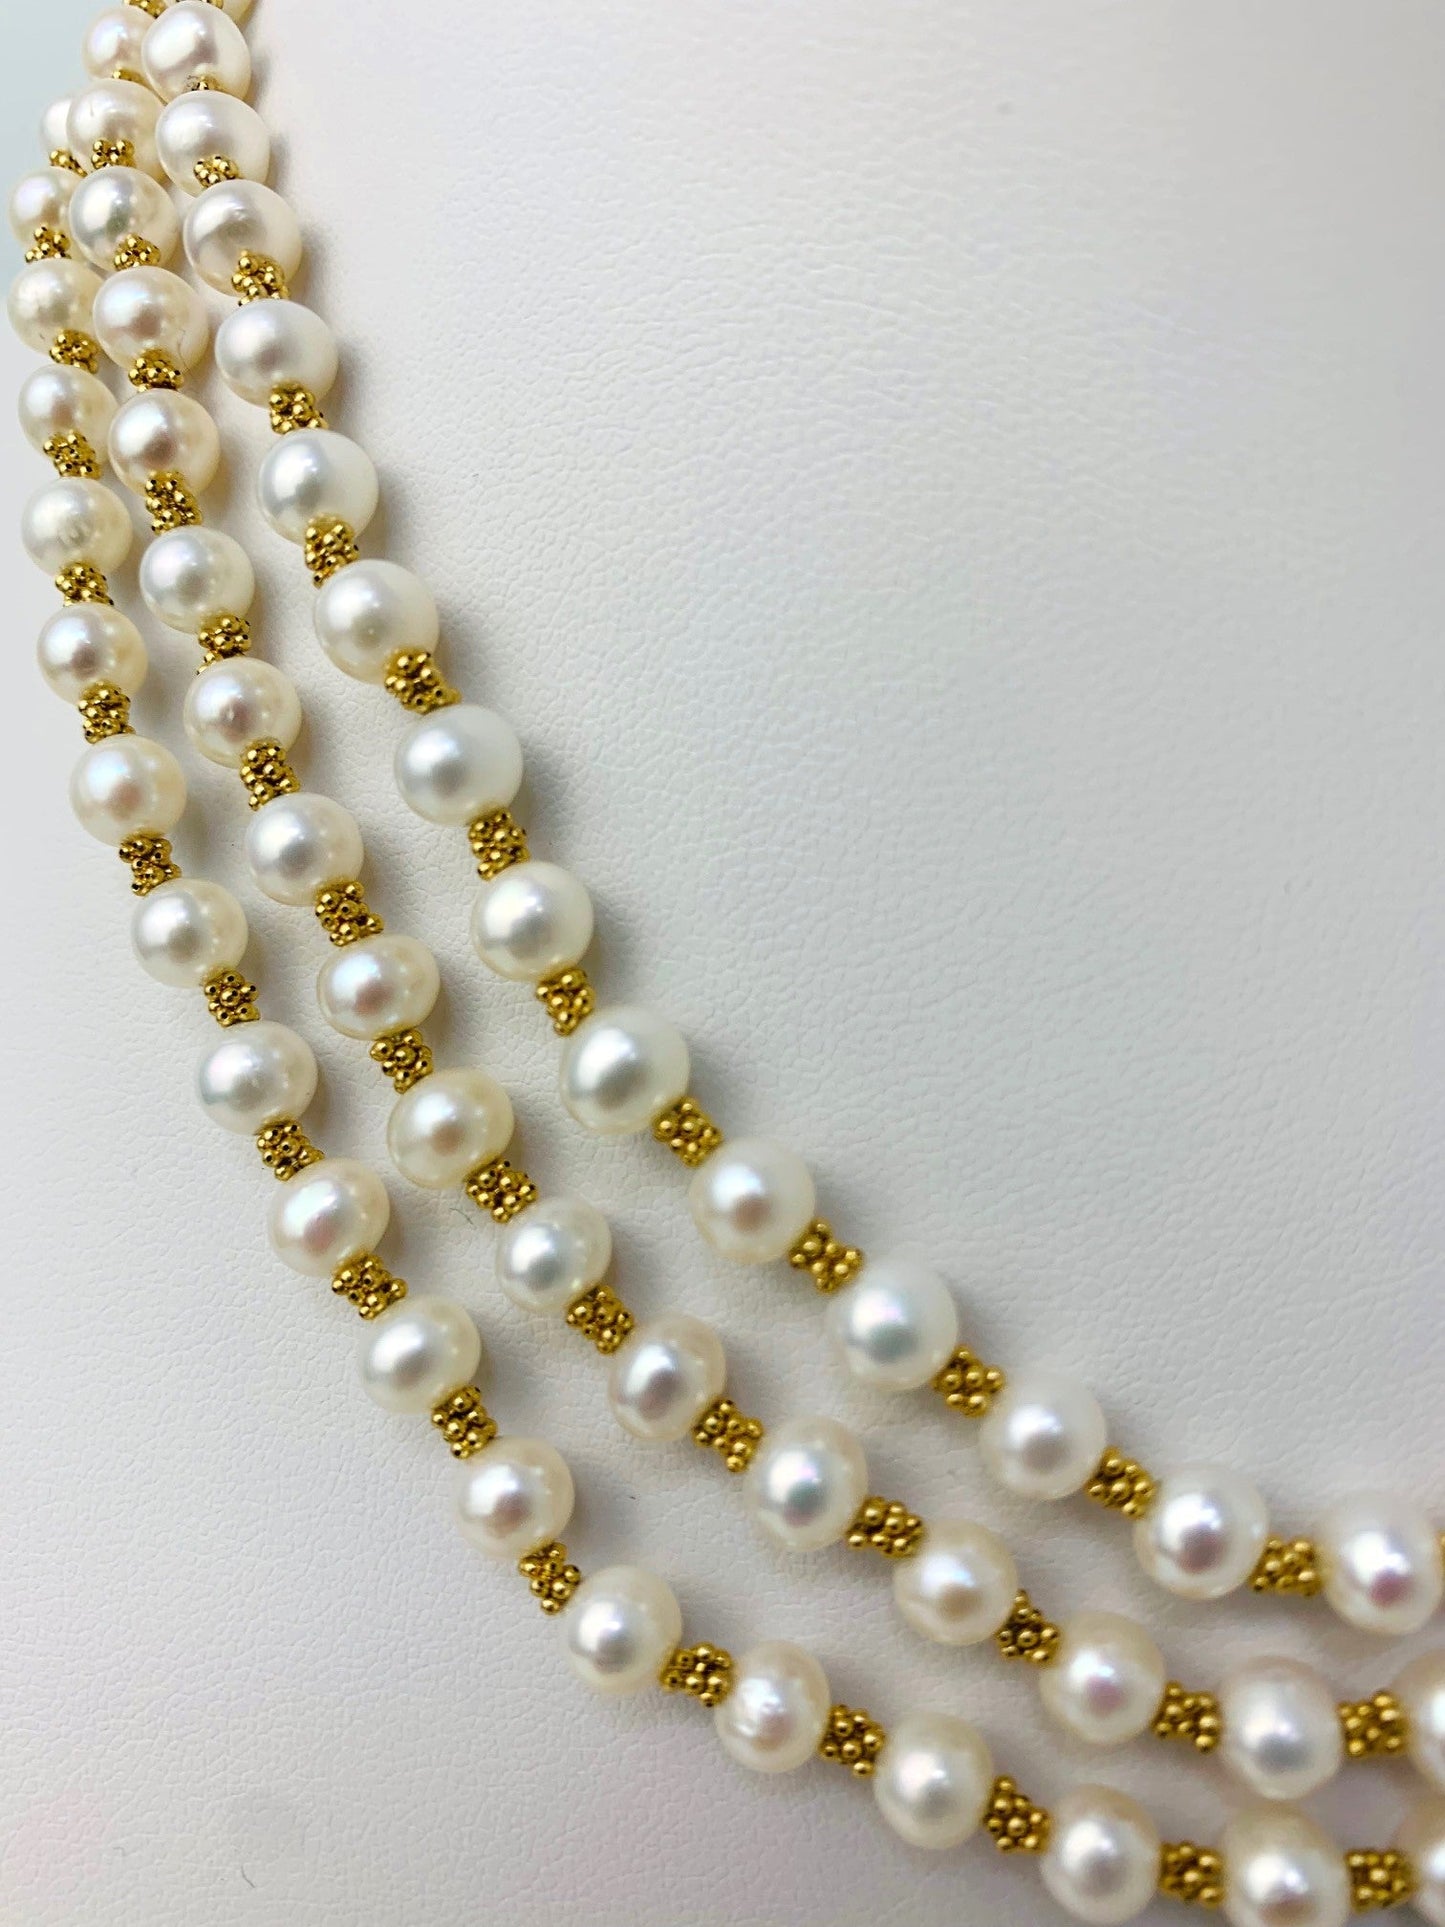 Clearance Sale! - 16" Triple Row Freshwater Pearl Necklace in 14KY - NCK-217-CRDPRL14Y-WH-16